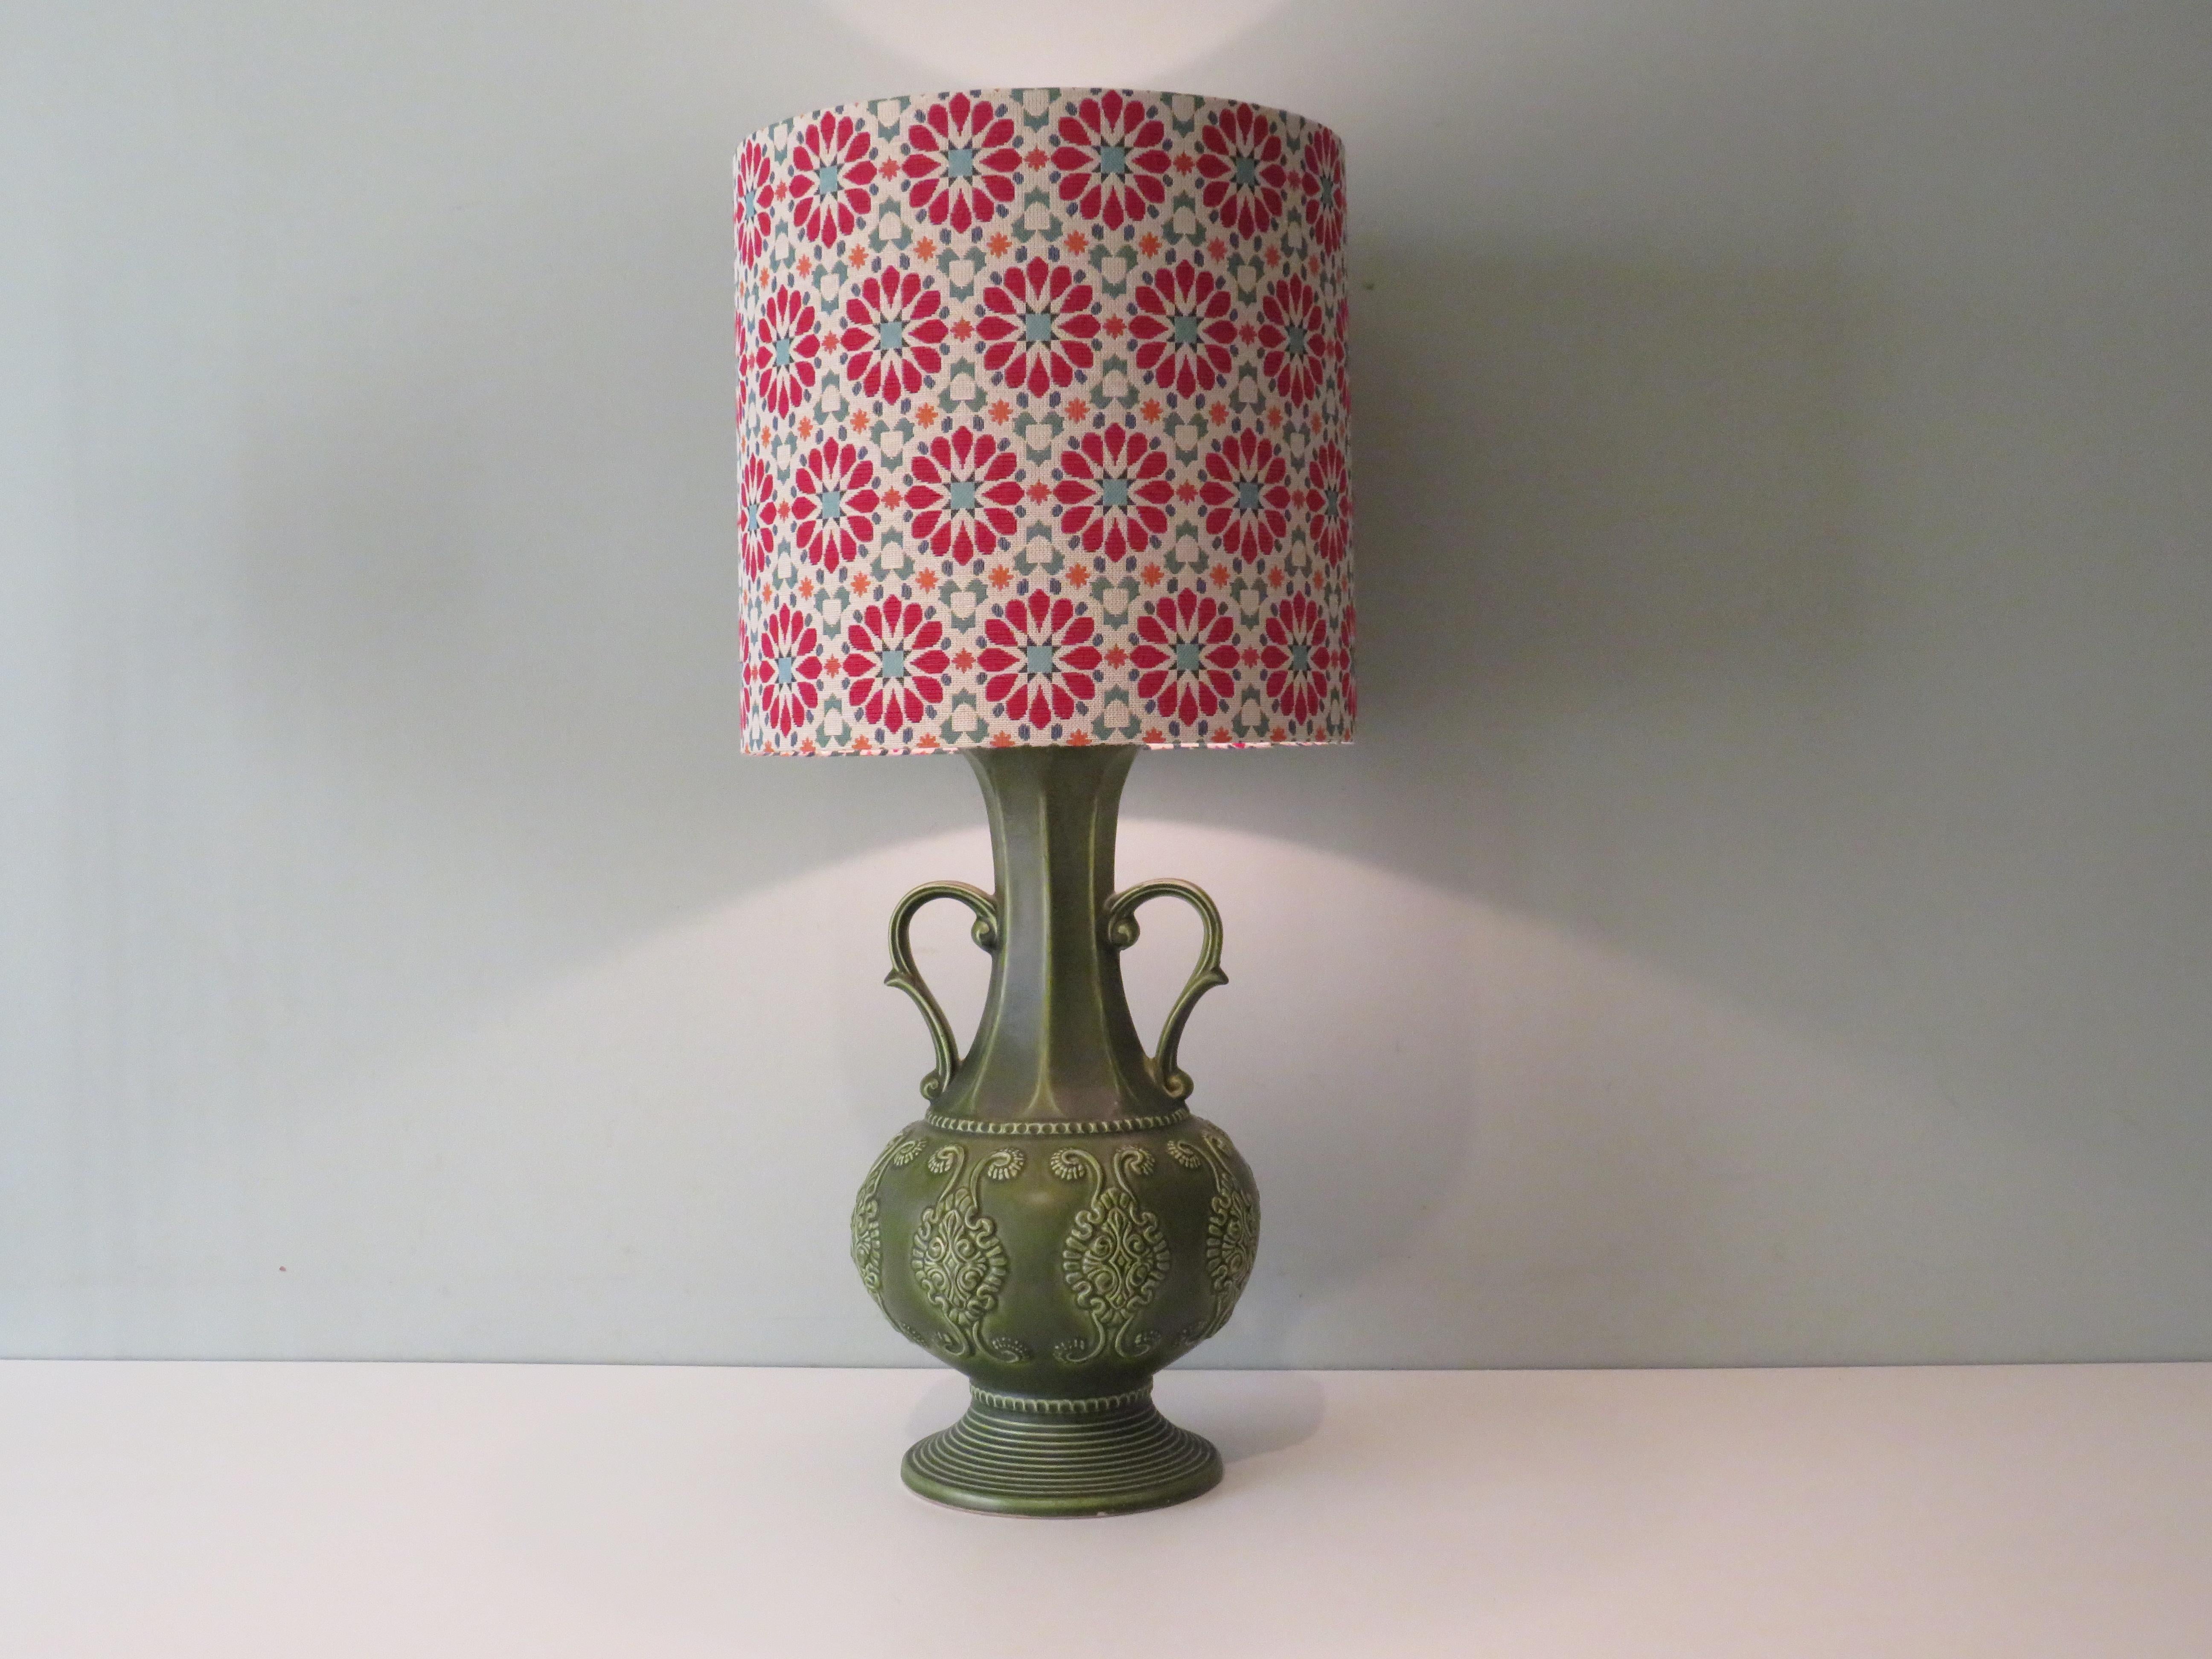 Large green ceramic table lamp produced by Bay Keramic studio, West-Germany 1960s.
The lamp is equipped with a new, handmade lampshade made of gobelin fabric and 1 E 27 fitting.
Dimensions:
Lamp base: height 51 cm, diameter 23 cm
Lampshade: